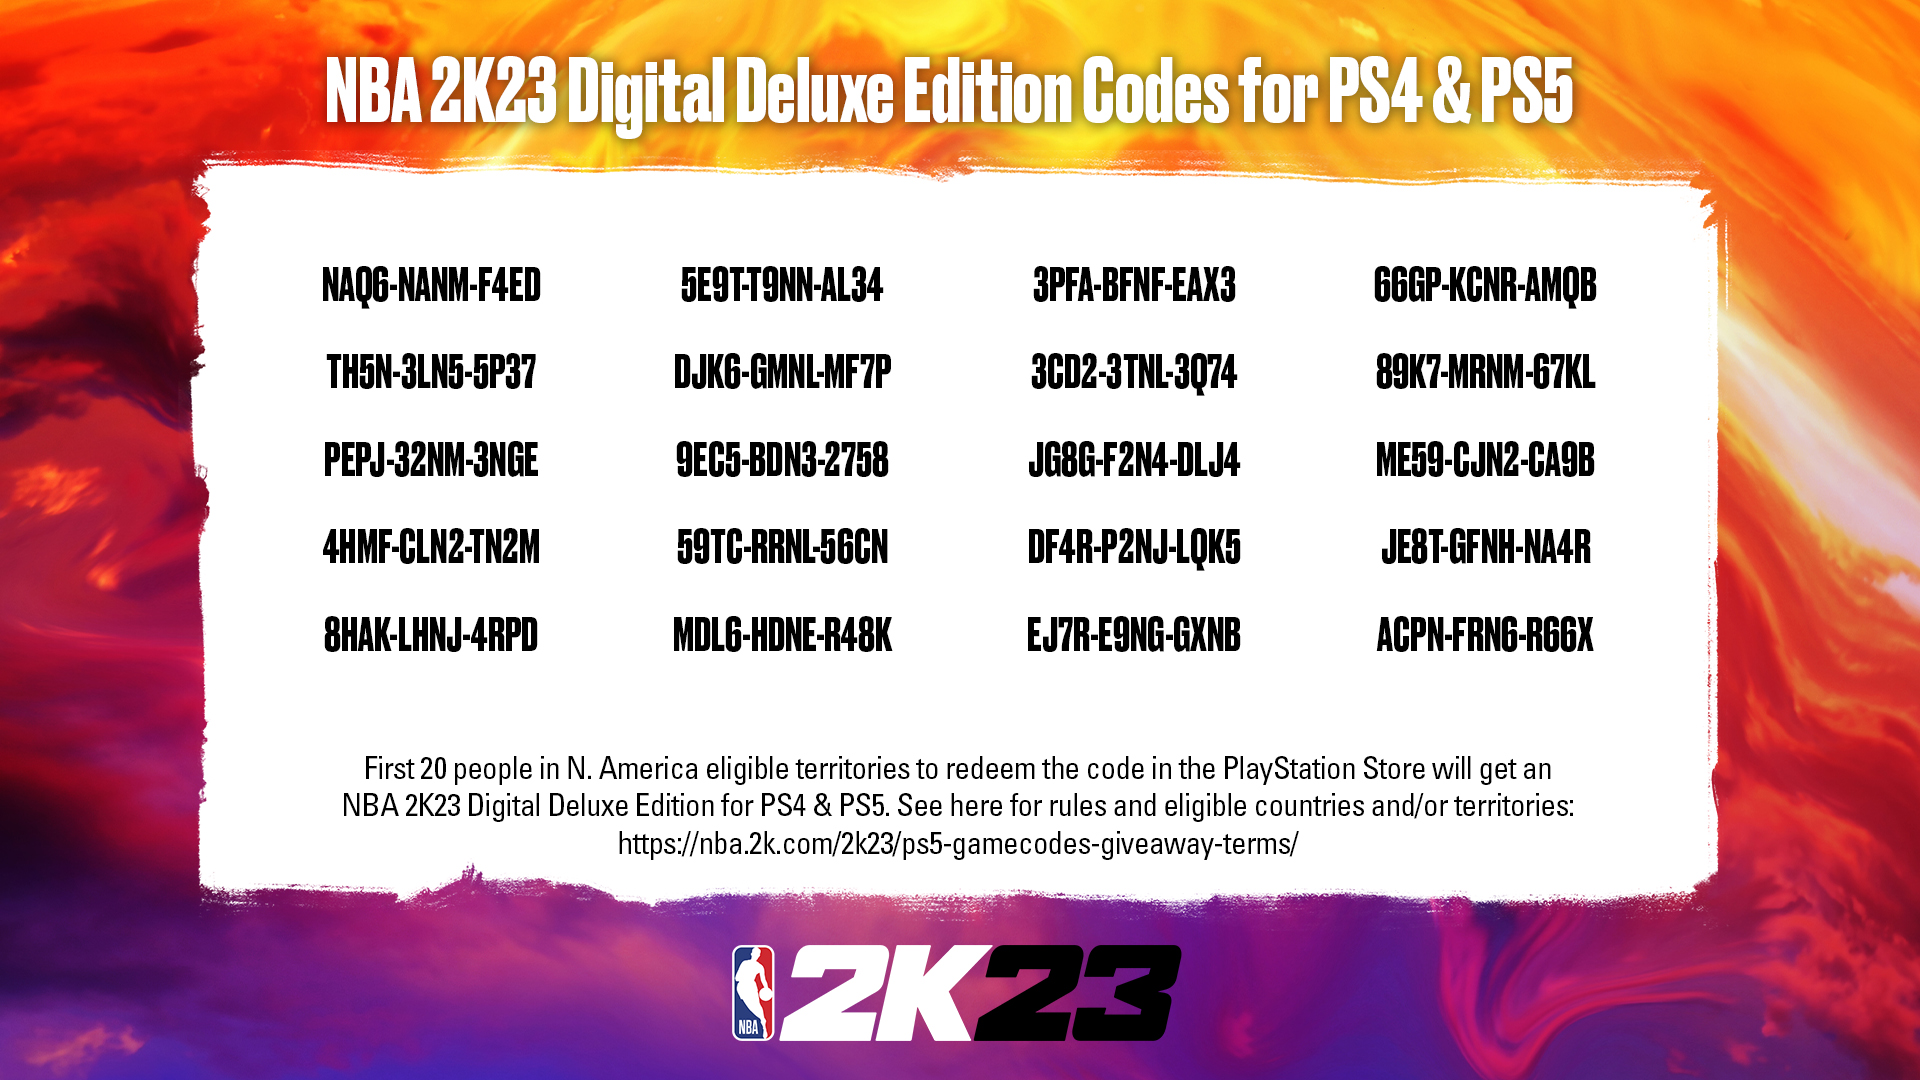 NBA 2K on Twitter "More NBA 2K23 Game Codes for PlayStation 🔥 2KDay